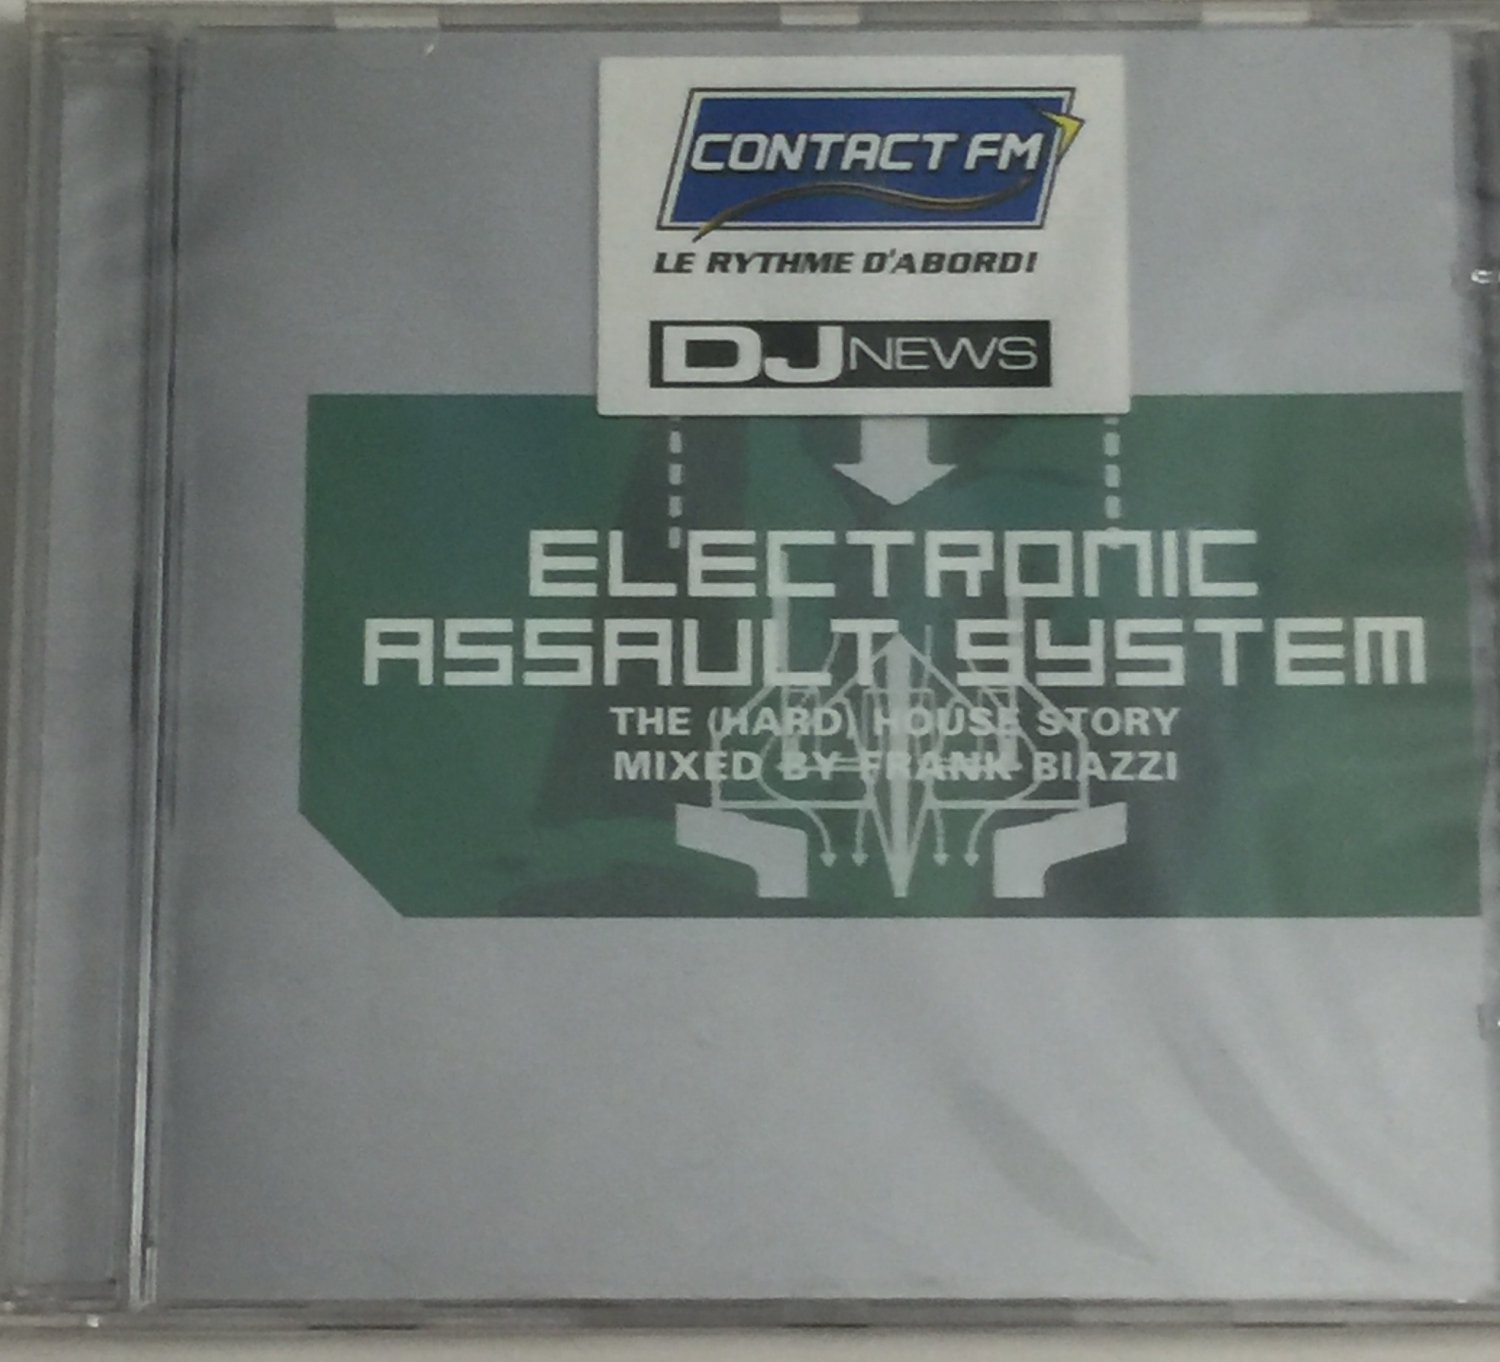 5290972CD - Frank Biazzi - Electronic Assault System: The (Hard) House Story (CD) OMNISOUNDS